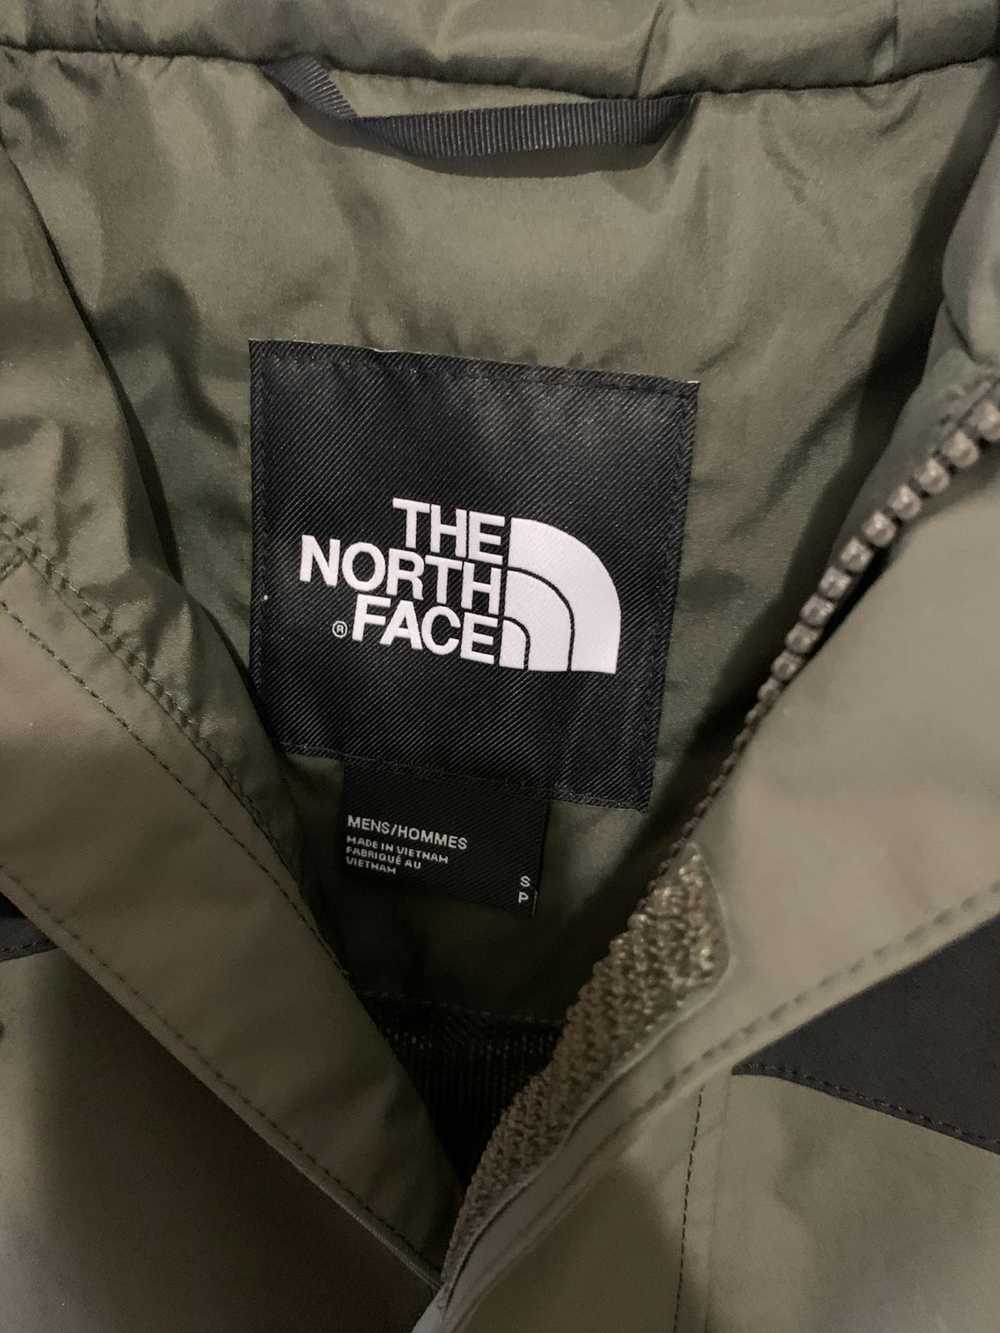 The North Face North Face City Breeze Jacket - image 2